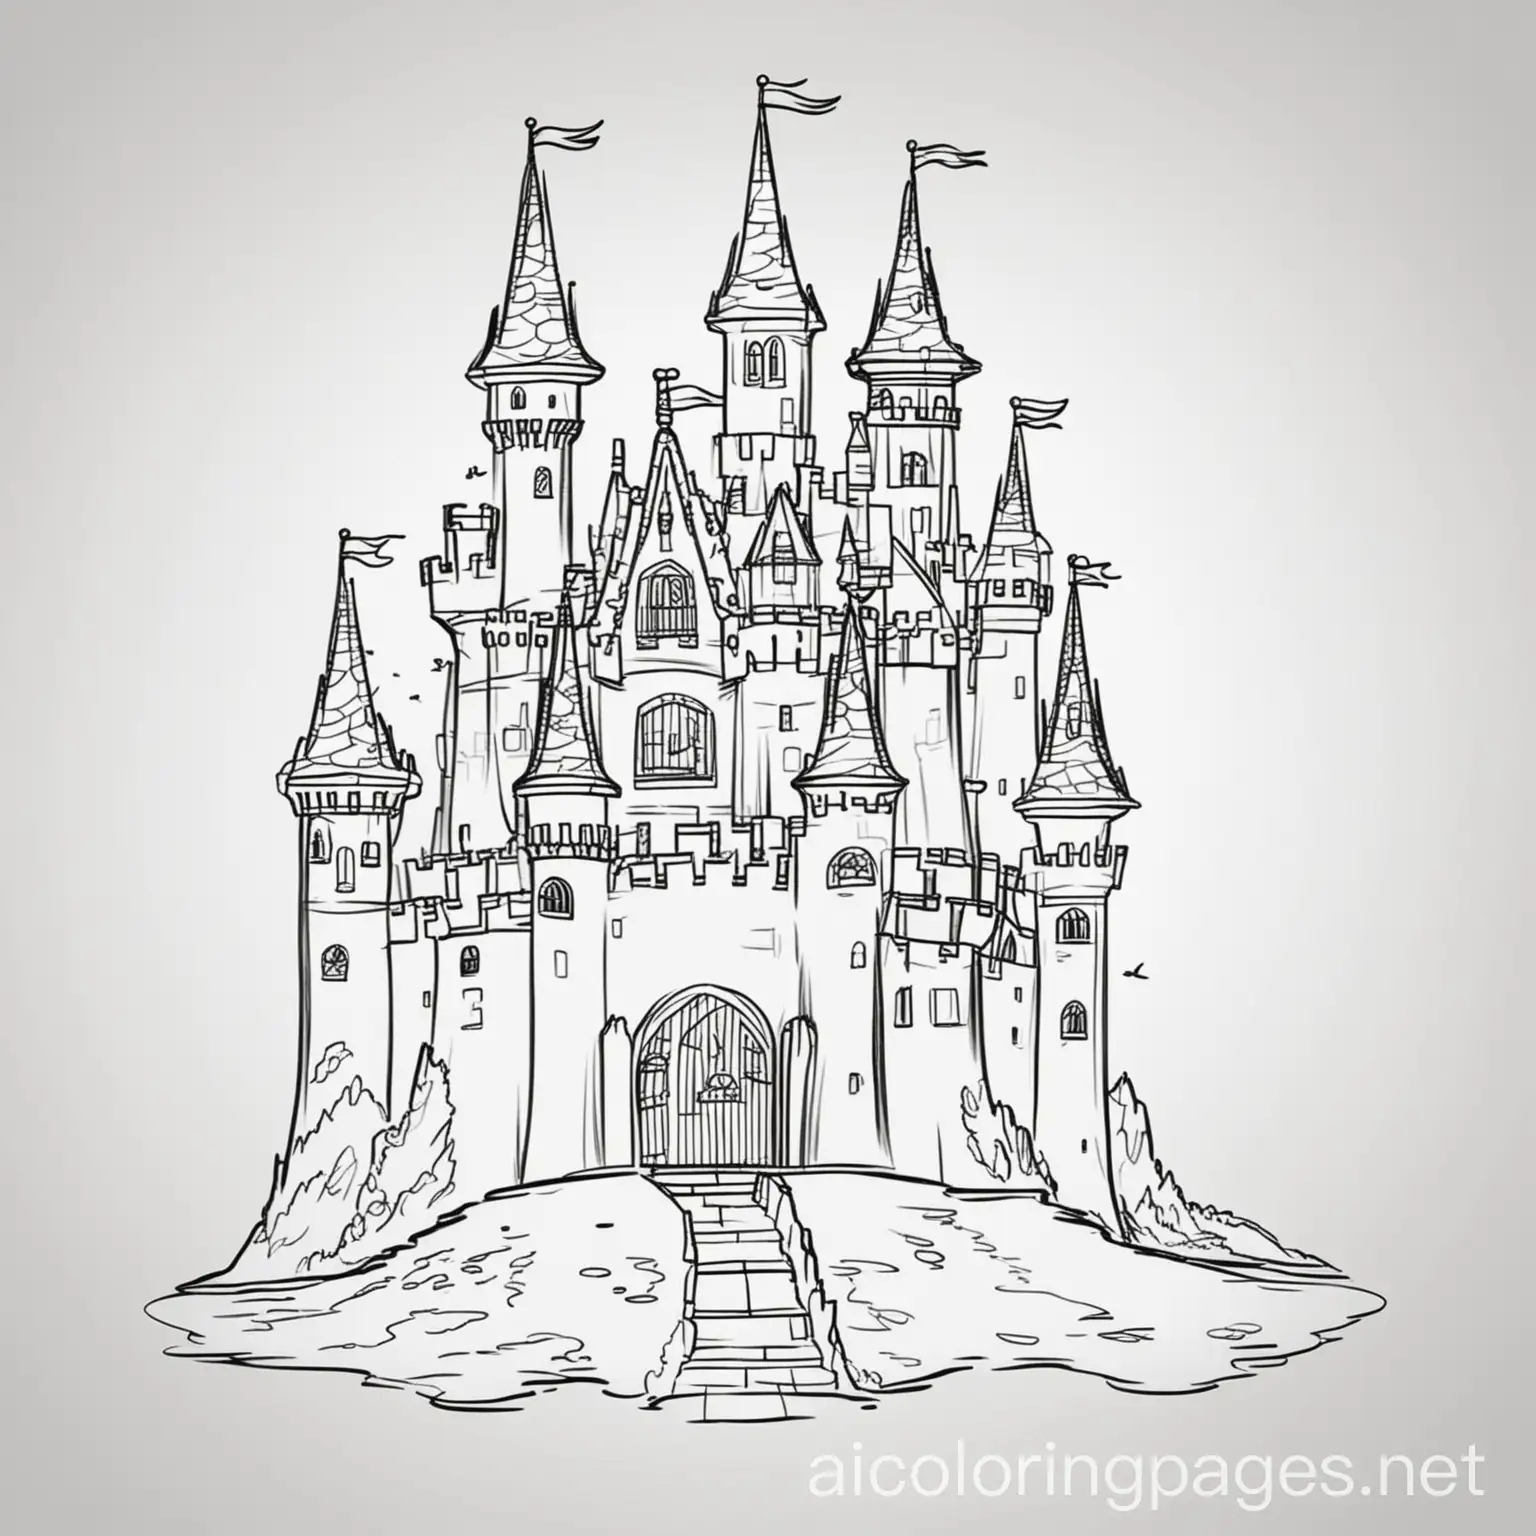 castle with princess, Coloring Page, black and white, line art, white background, Simplicity, Ample White Space. The background of the coloring page is plain white to make it easy for young children to color within the lines. The outlines of all the subjects are easy to distinguish, making it simple for kids to color without too much difficulty